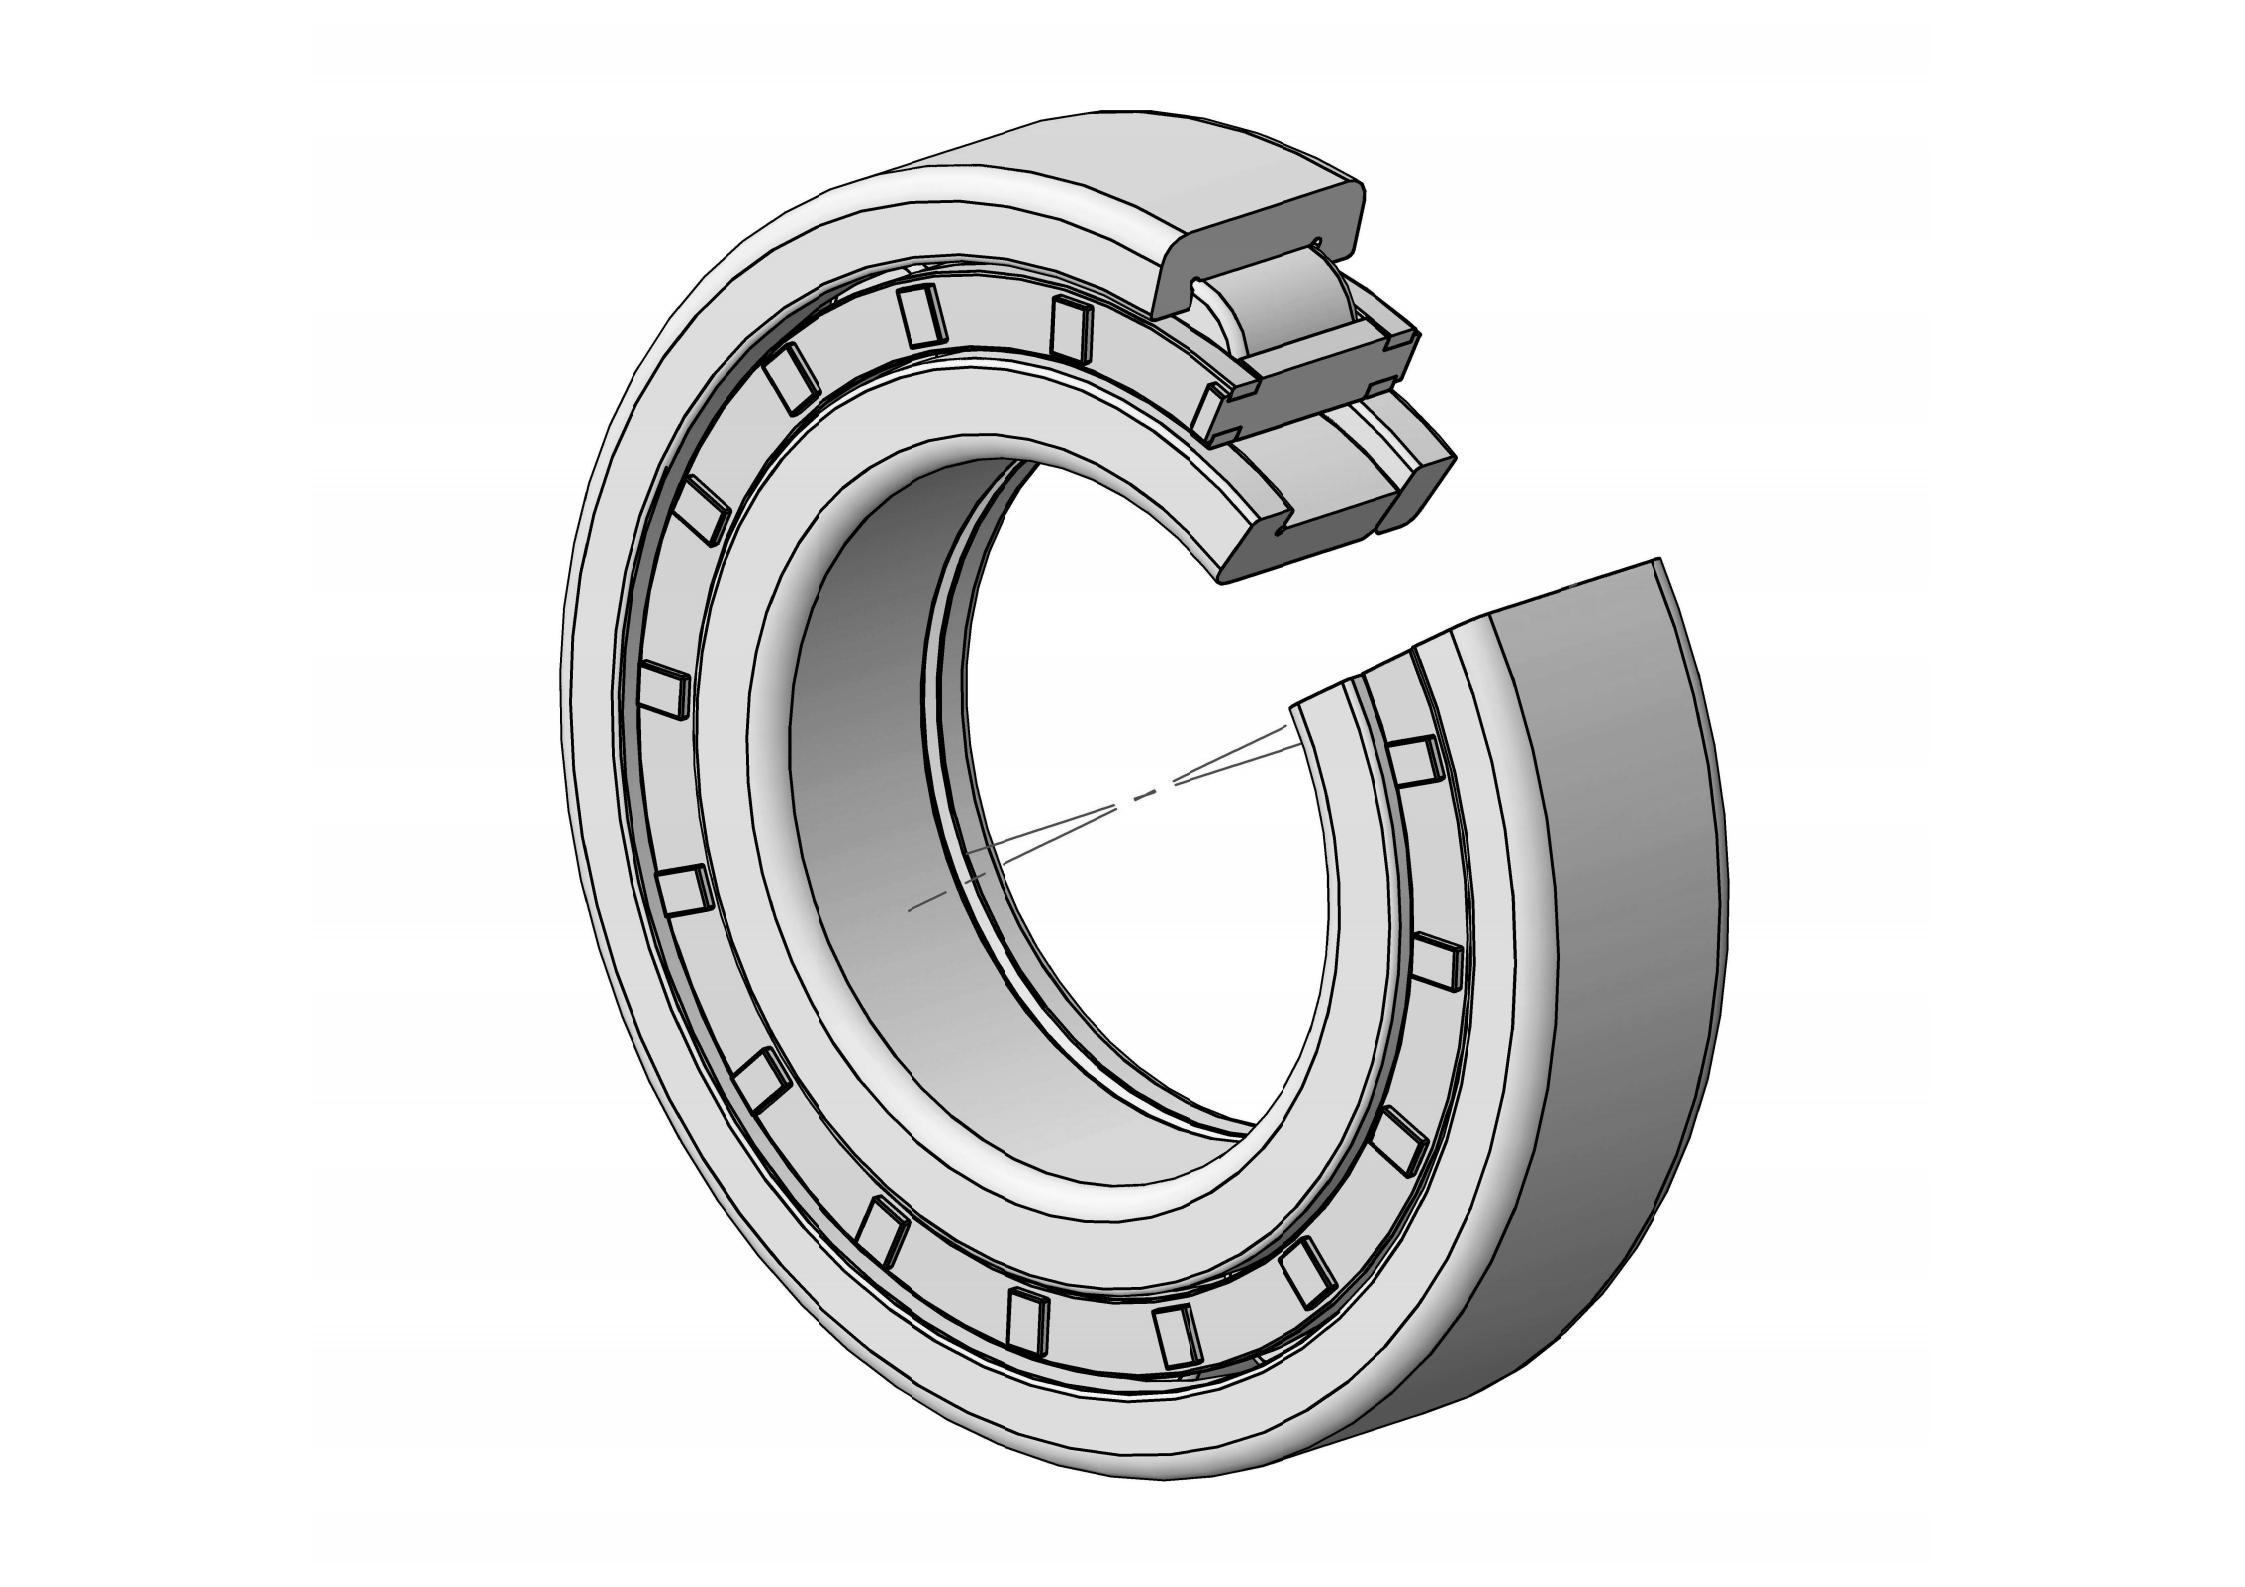 NUP2236-EM Single Row Cylindrical roller bearing 